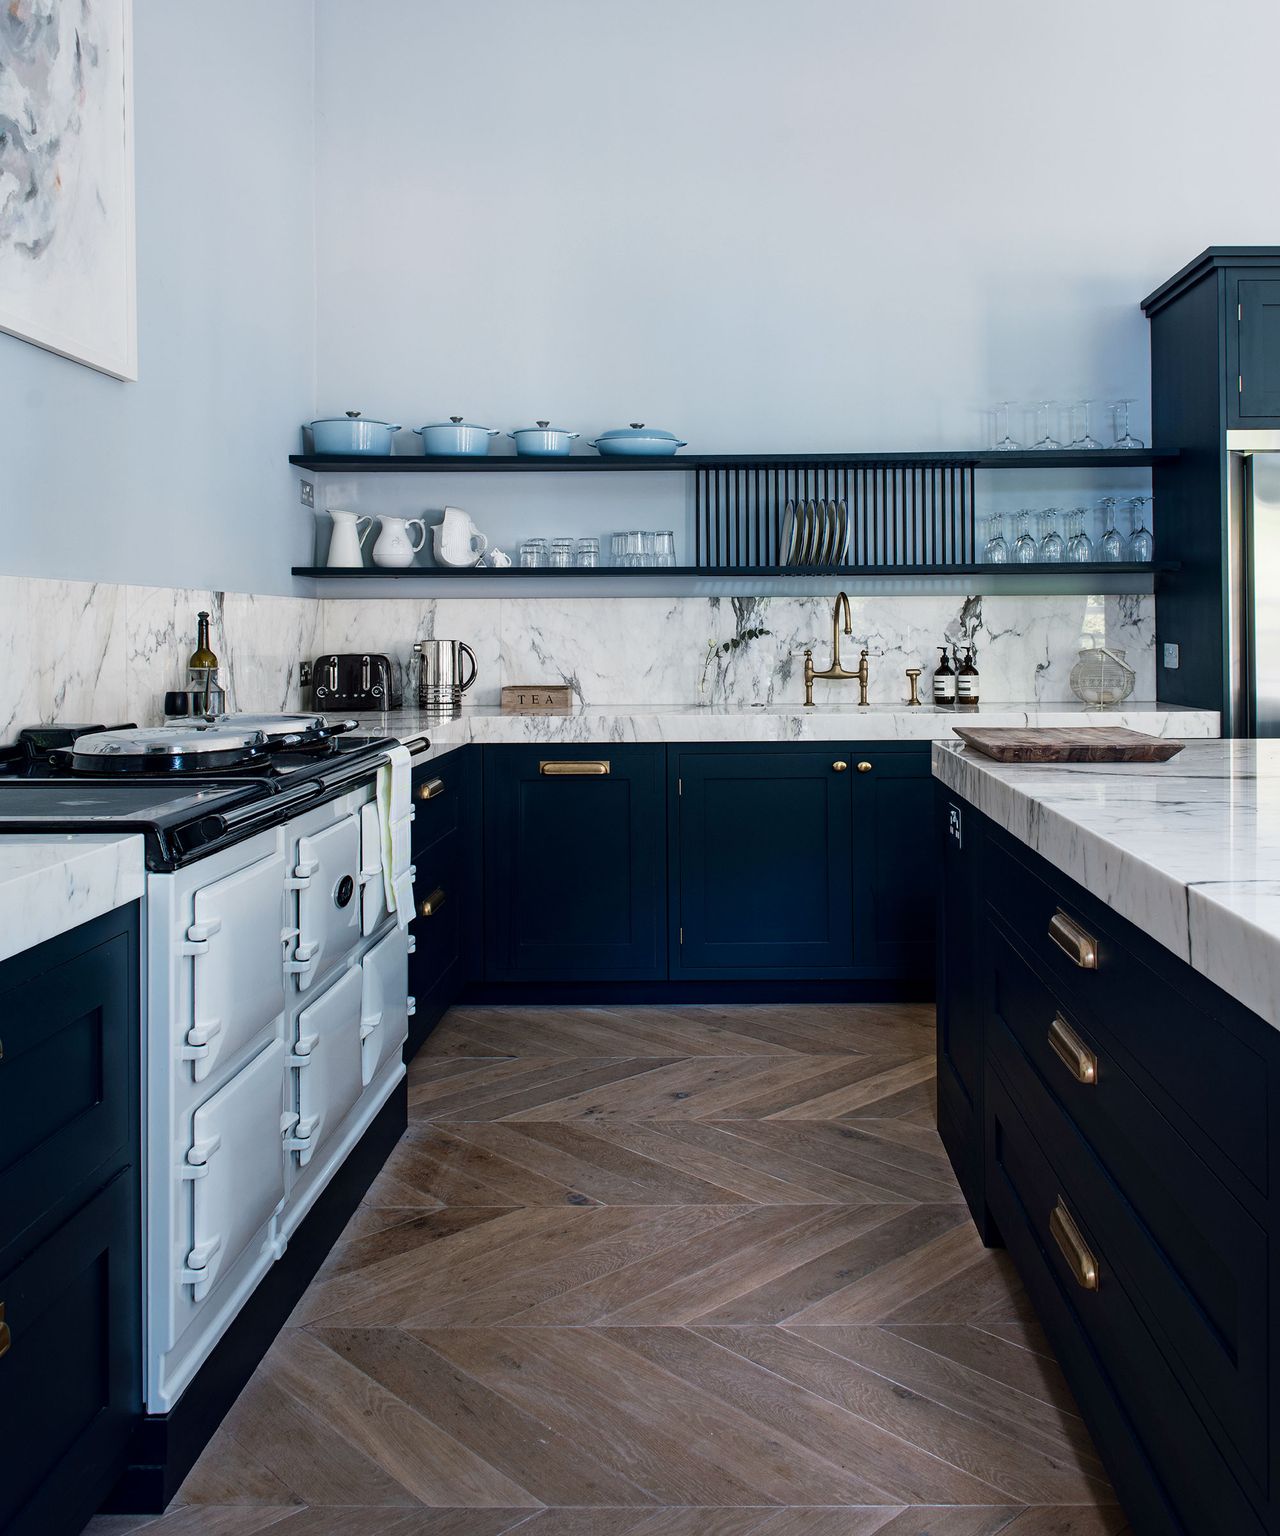 How to decorate kitchen counters: 10 ways to a functional and chic space